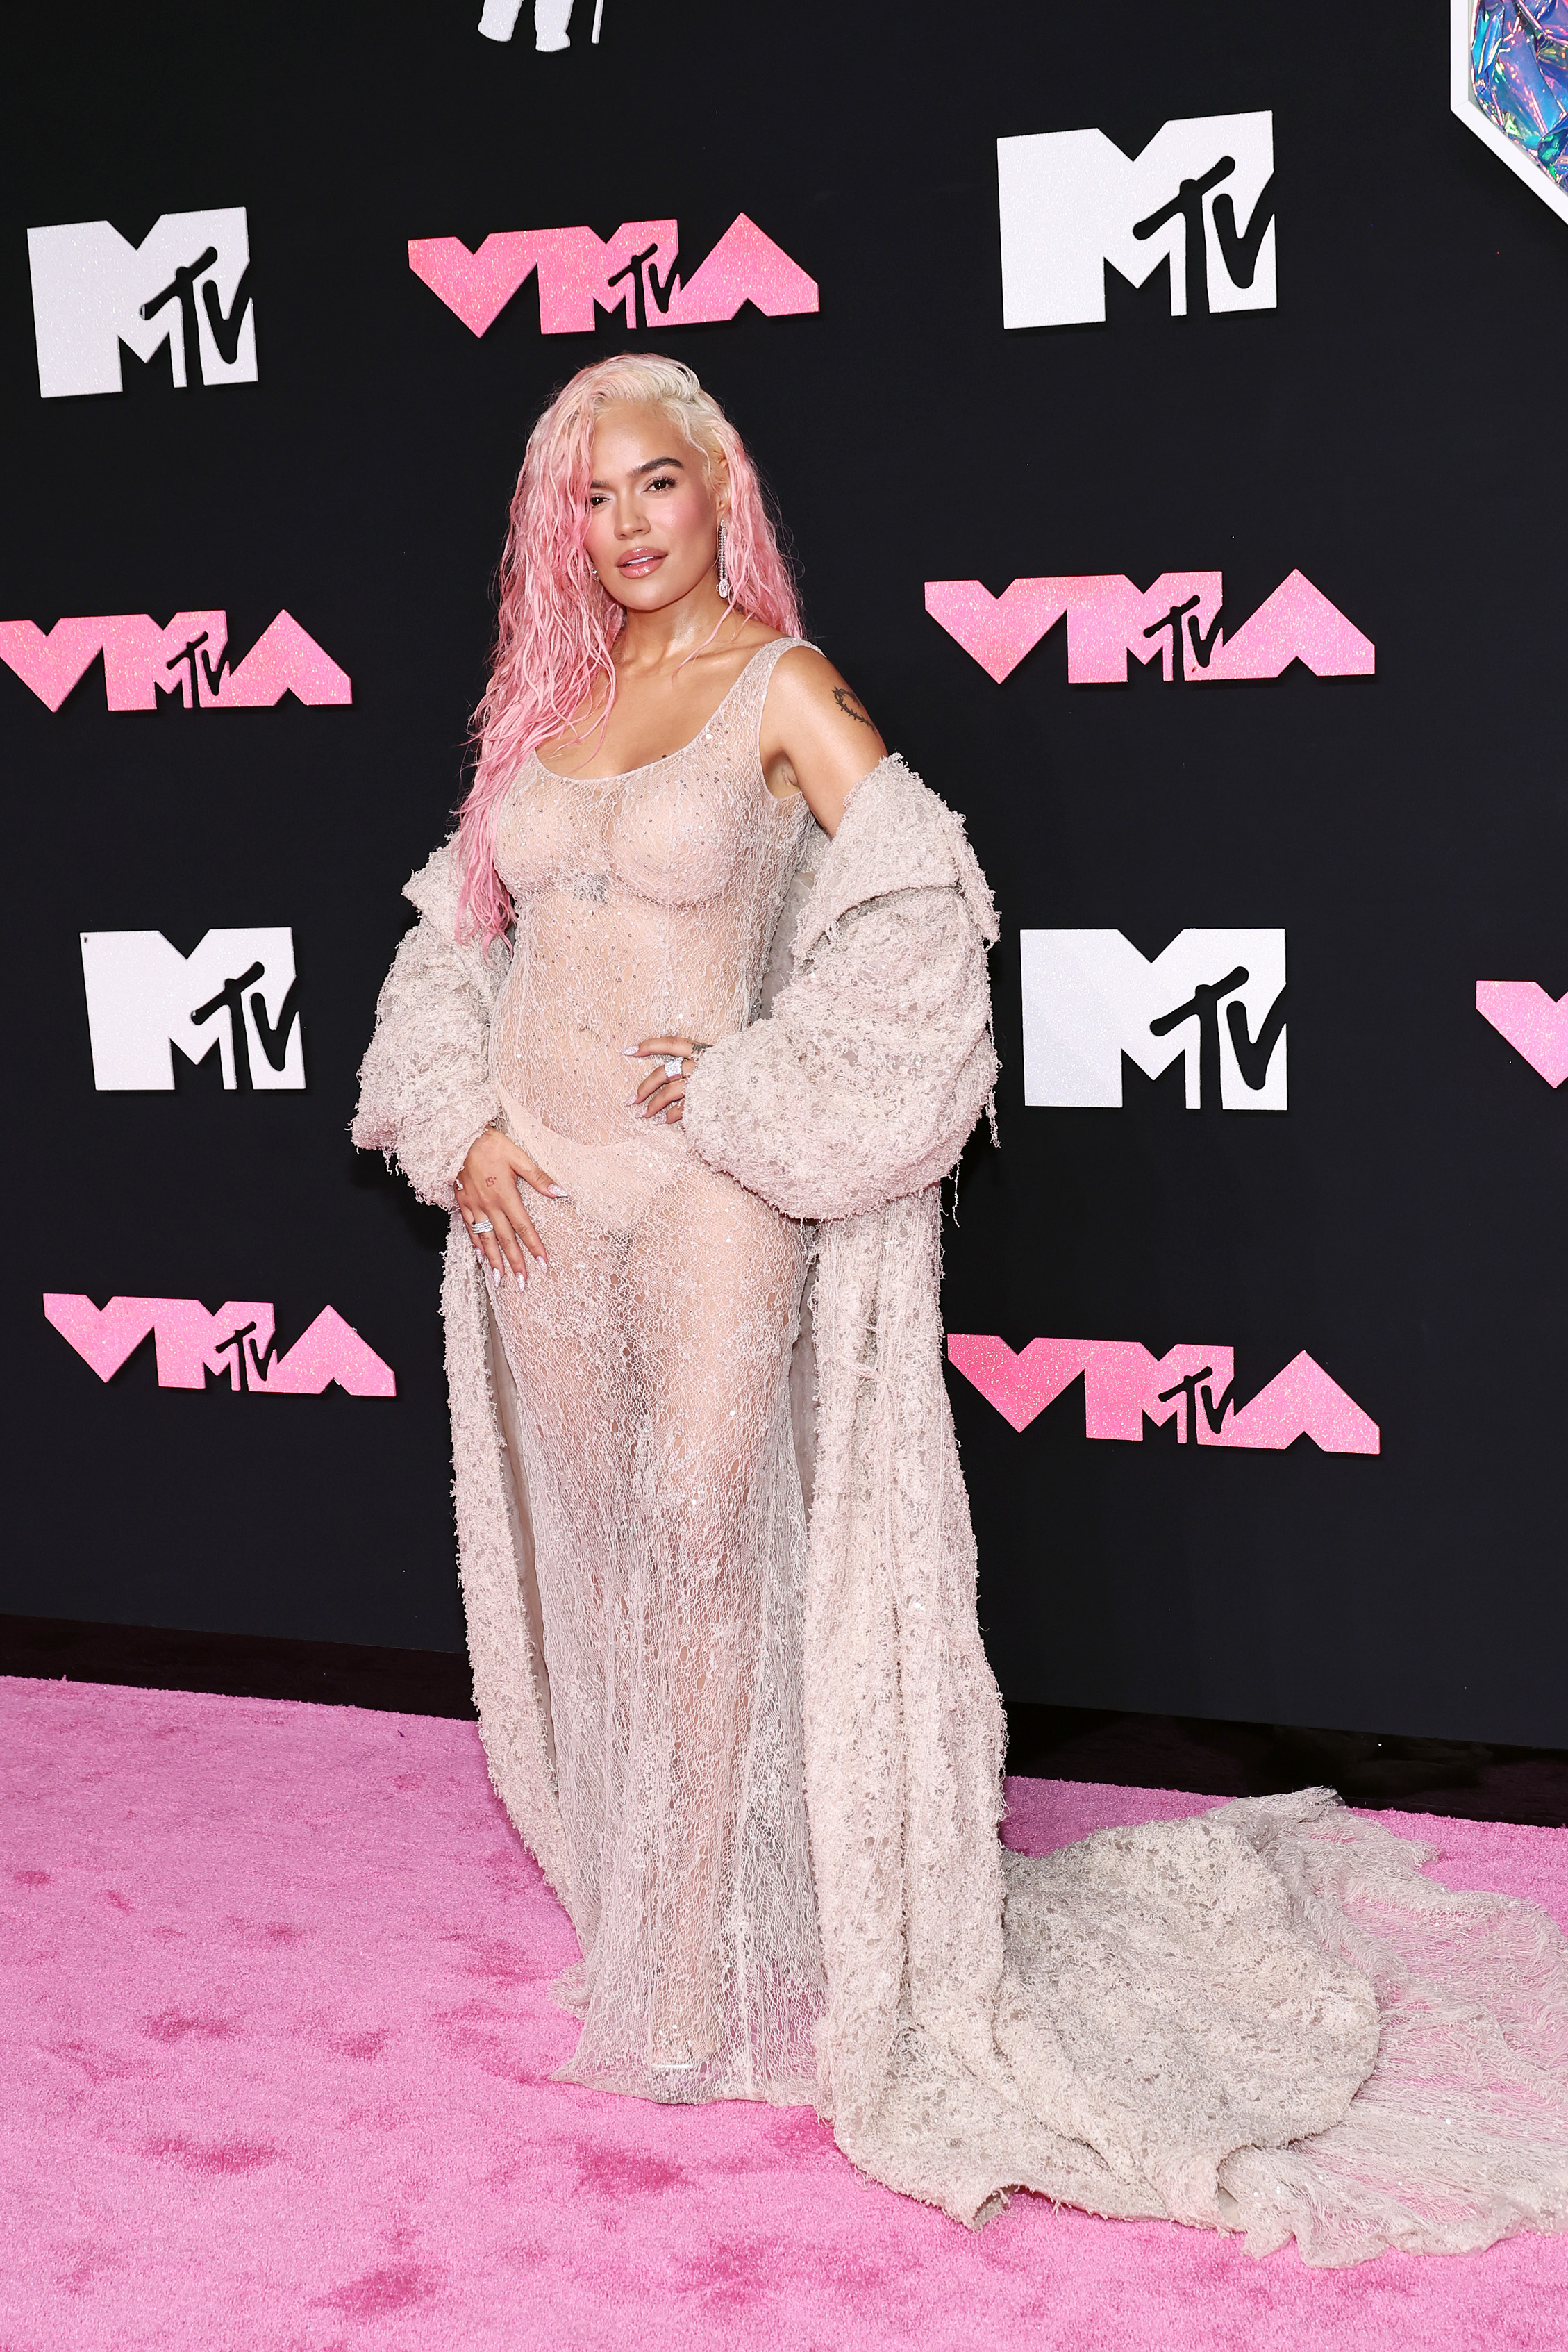 Sheer Dresses Were Literally Everywhere at the 2023 VMAs